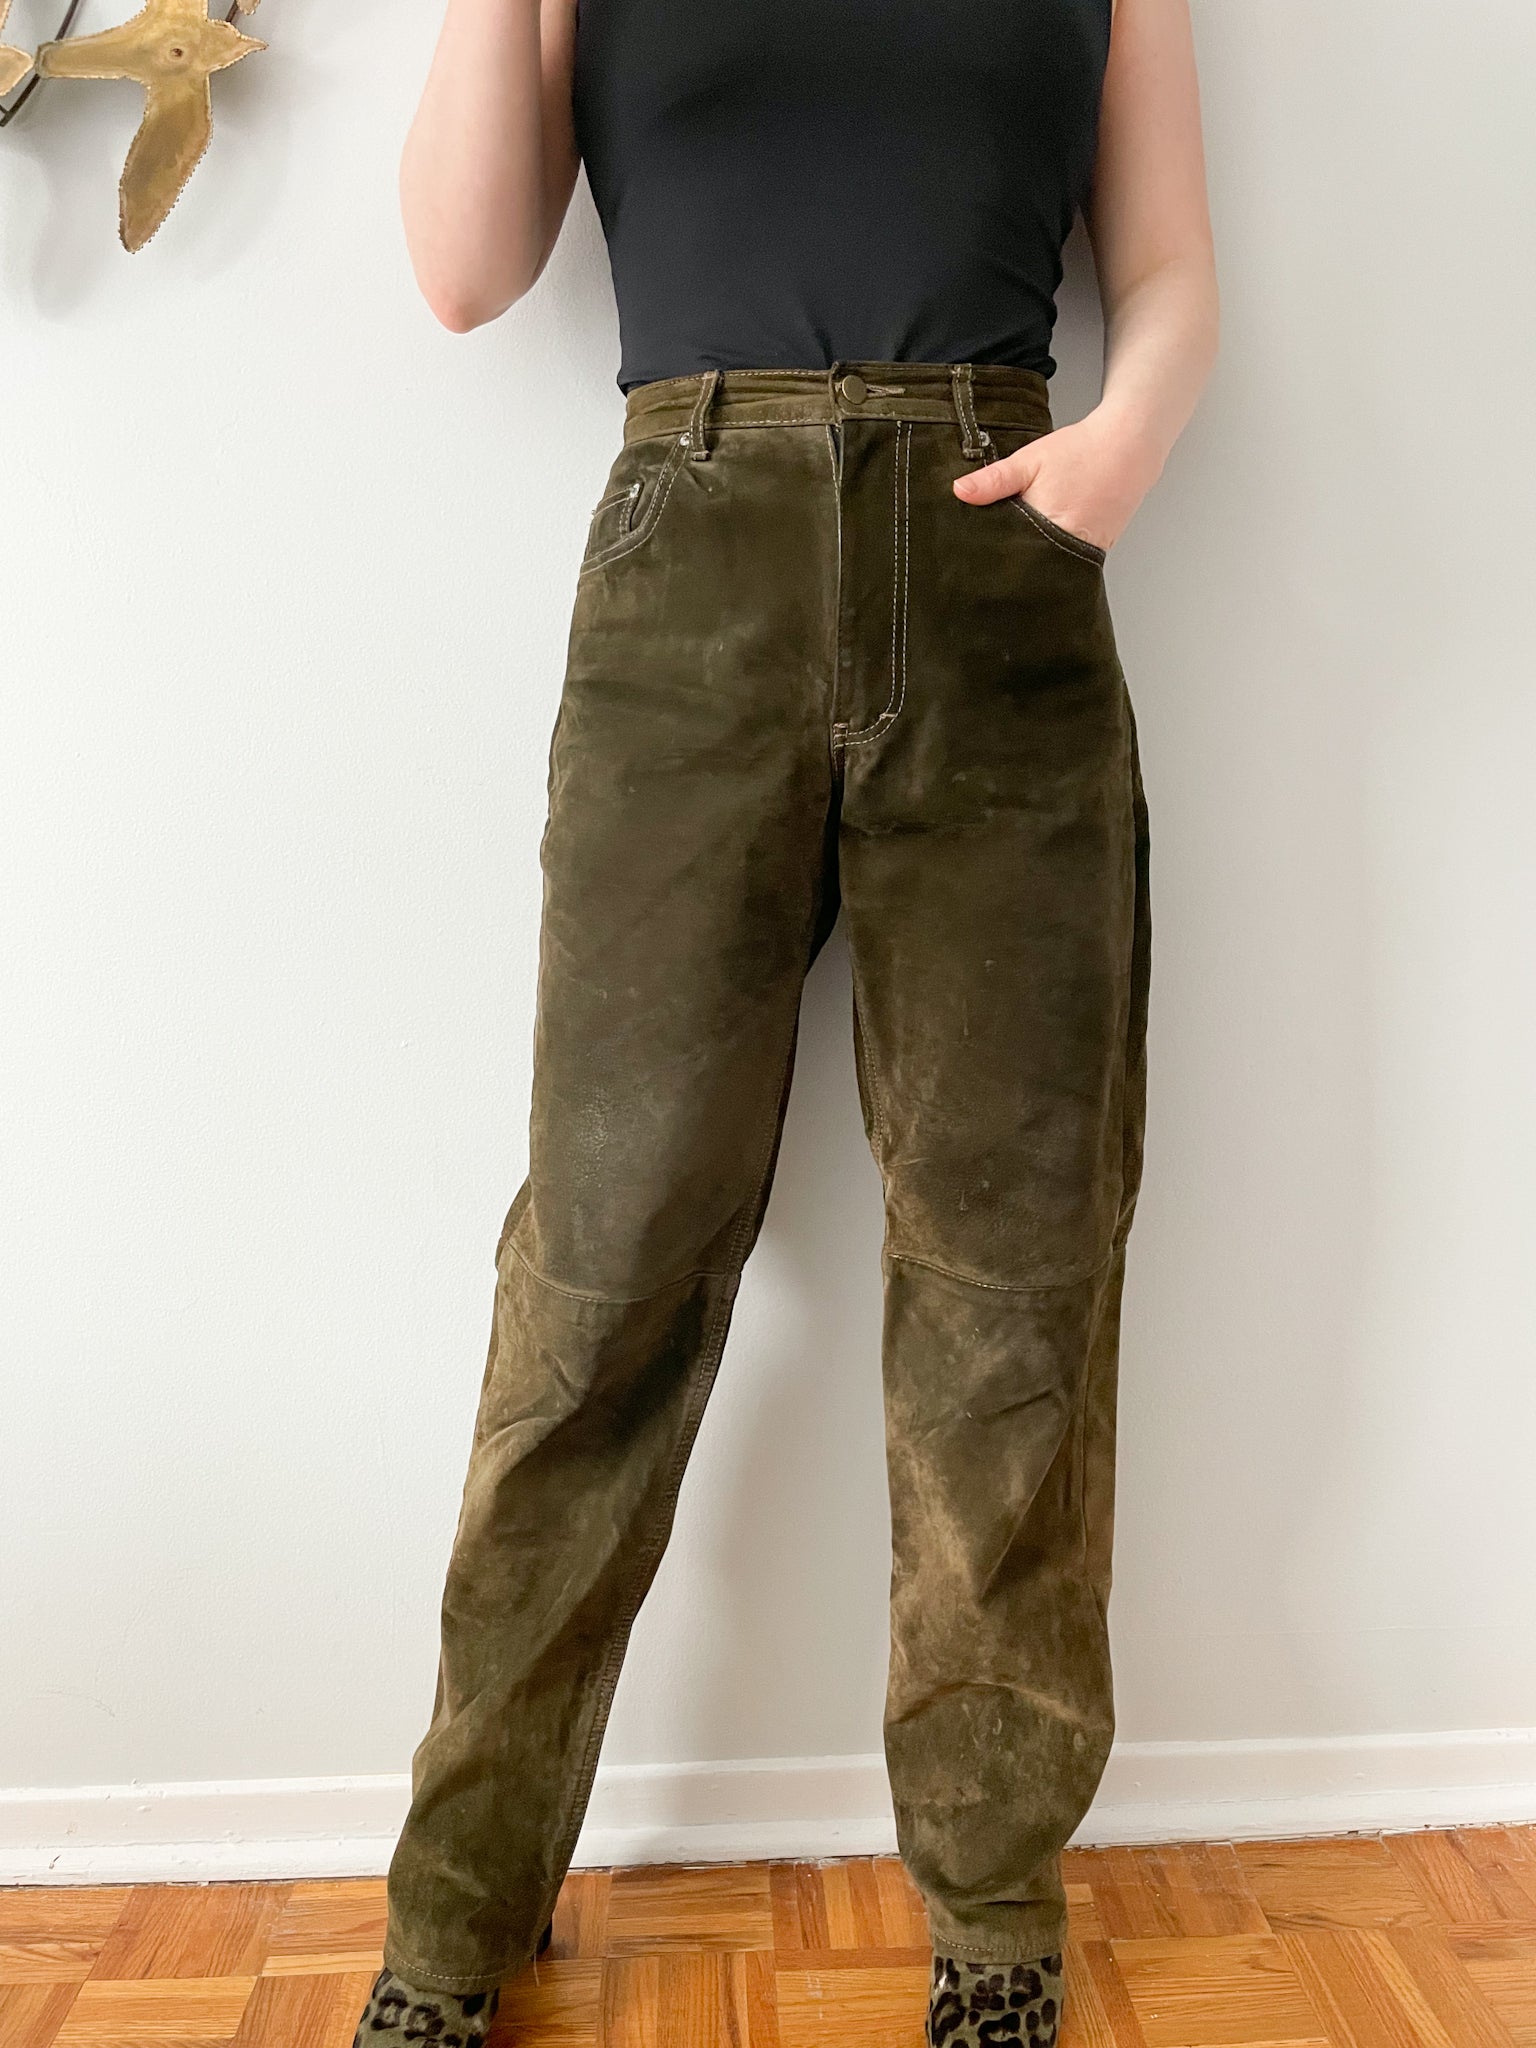 Per Suede Olive Green Genuine Suede Leather High Rise Barrel Pants